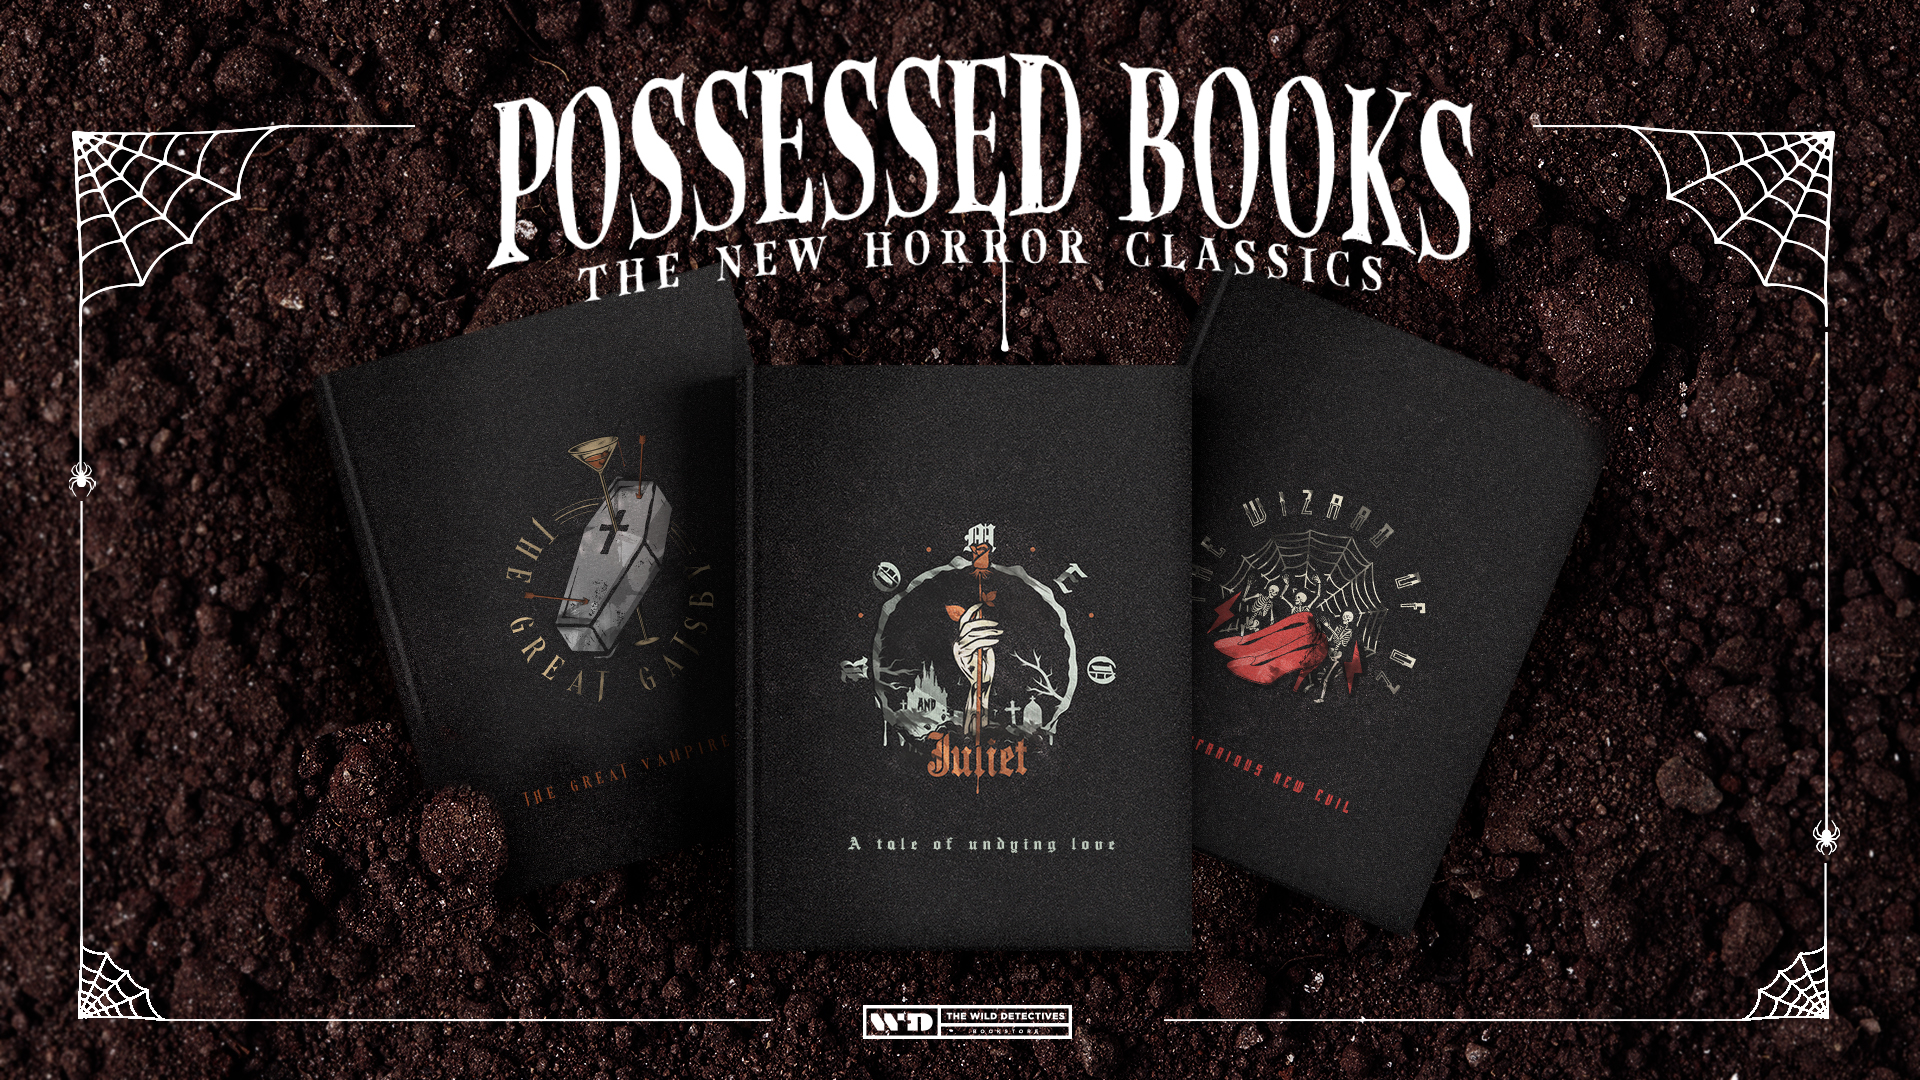 Possessed Books: A spooky spin on your favorite classic books